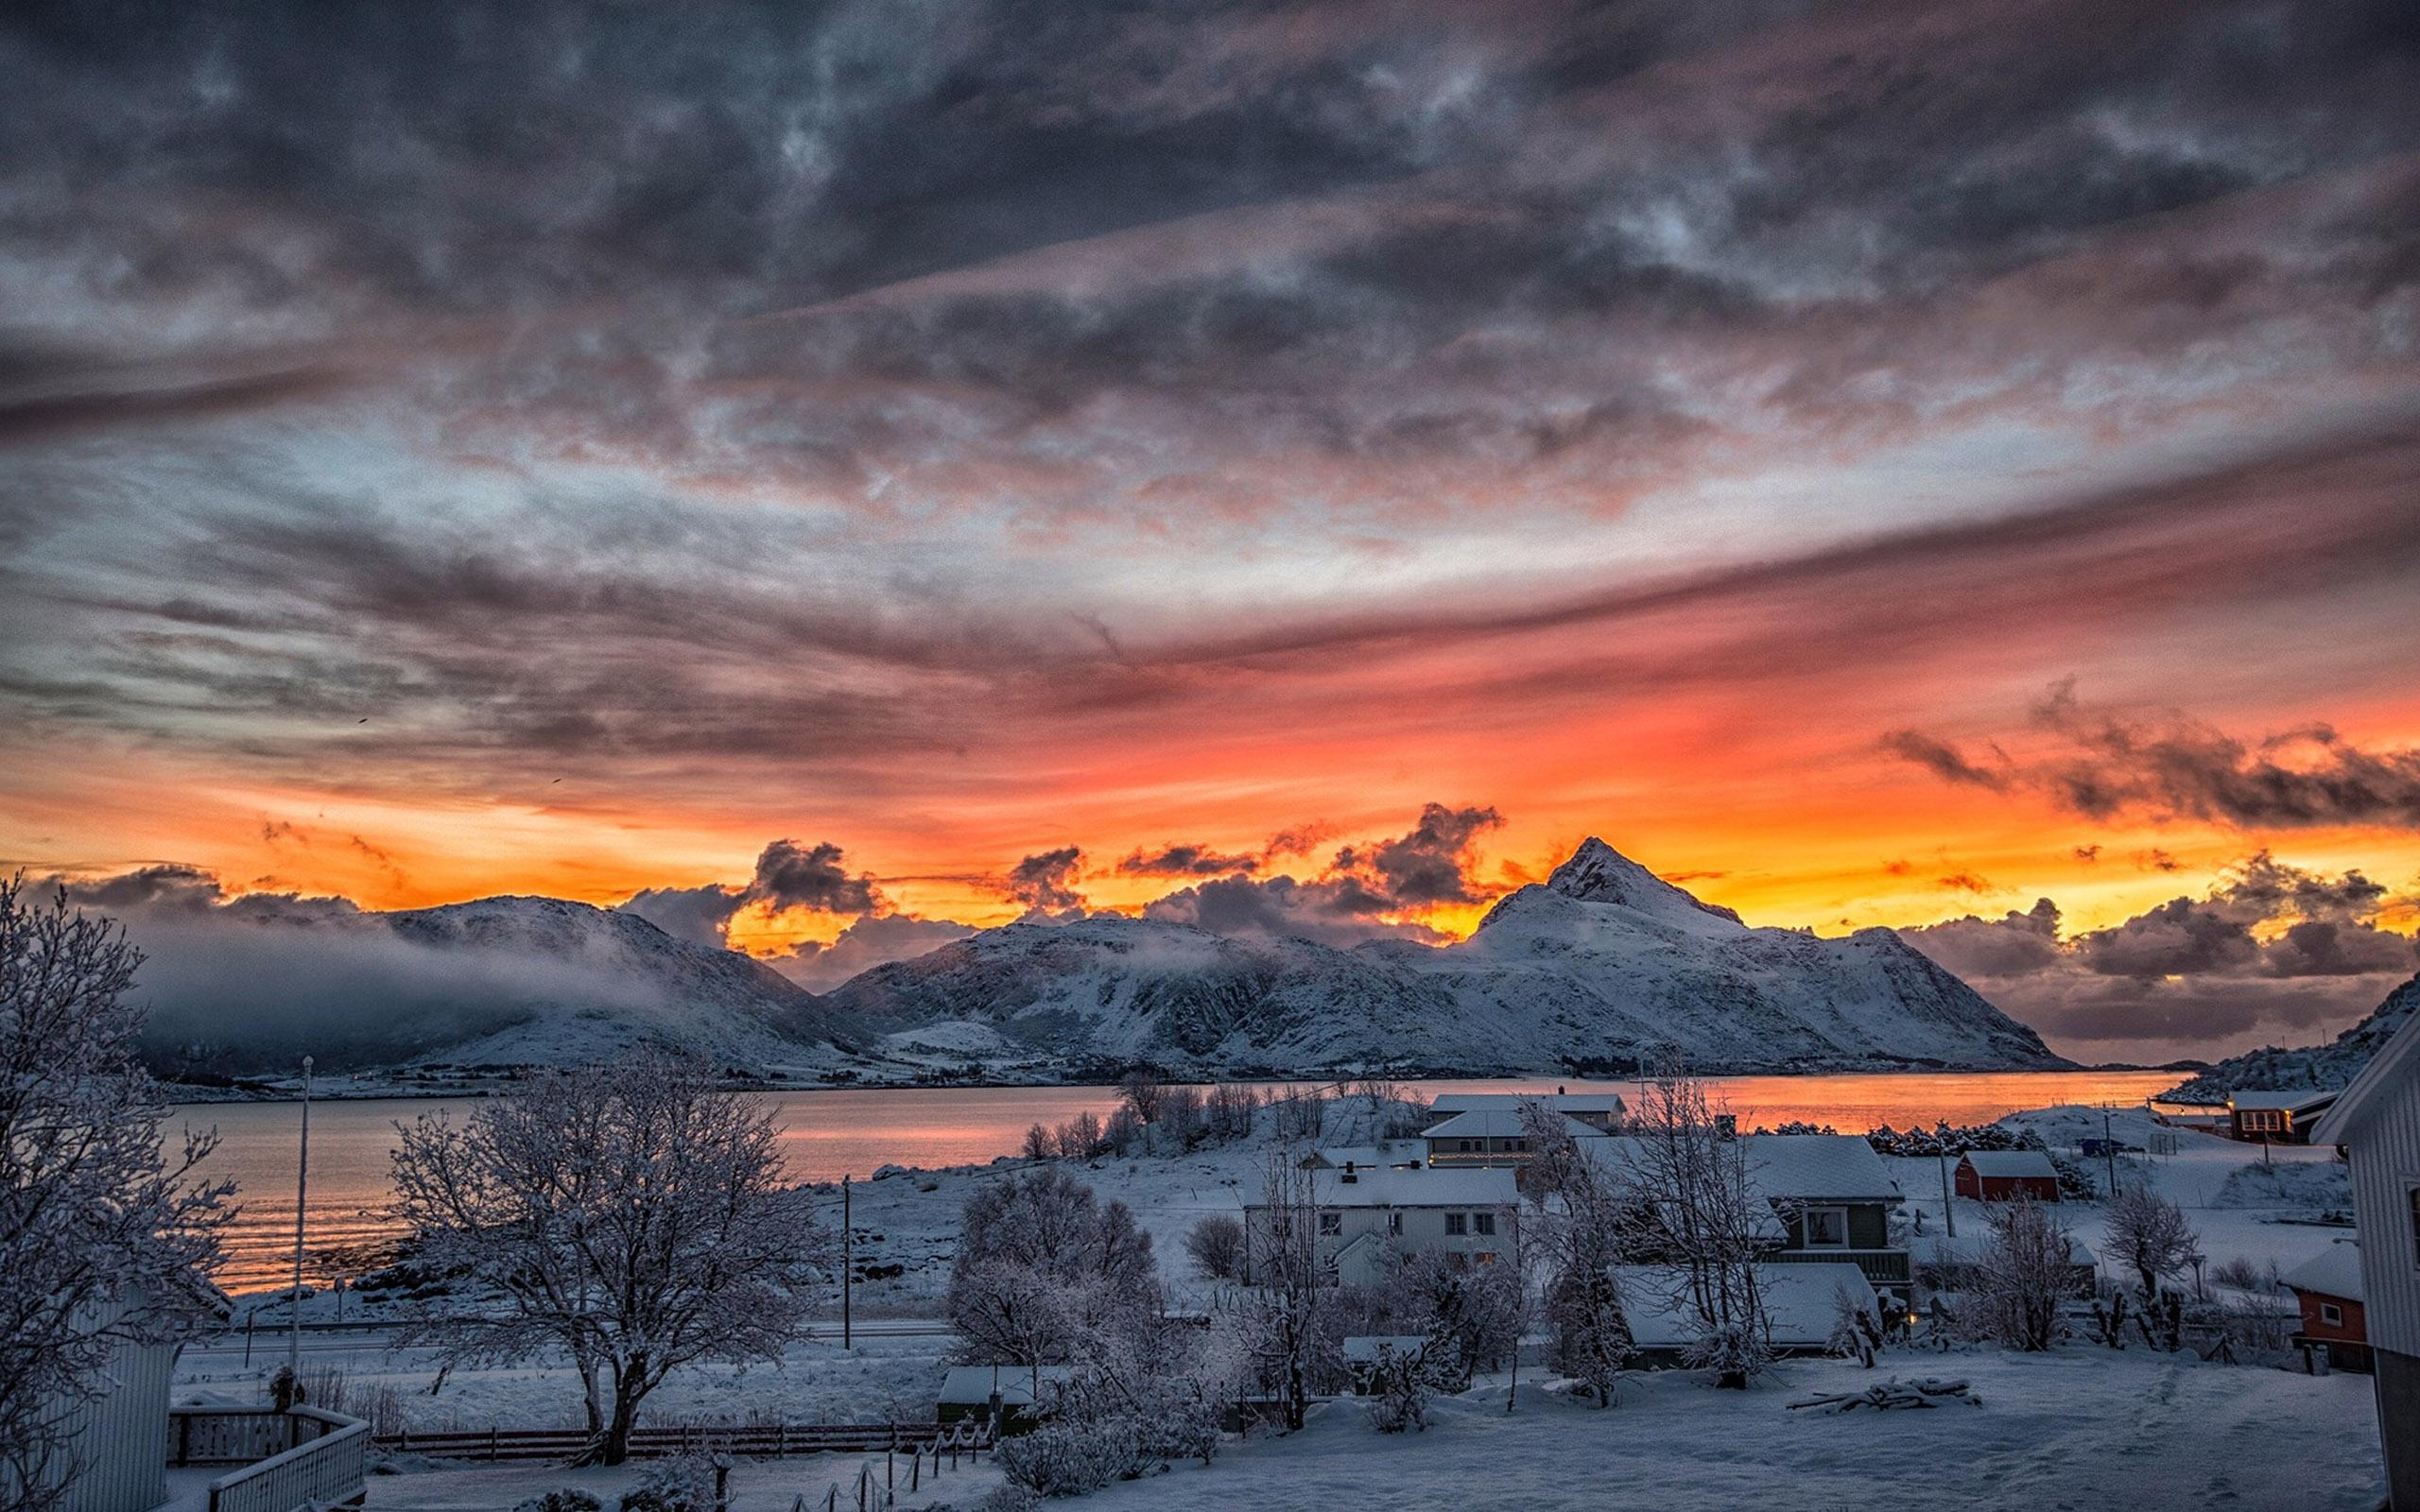 Northern Norway Winter Snow Mountains With Rural Houses